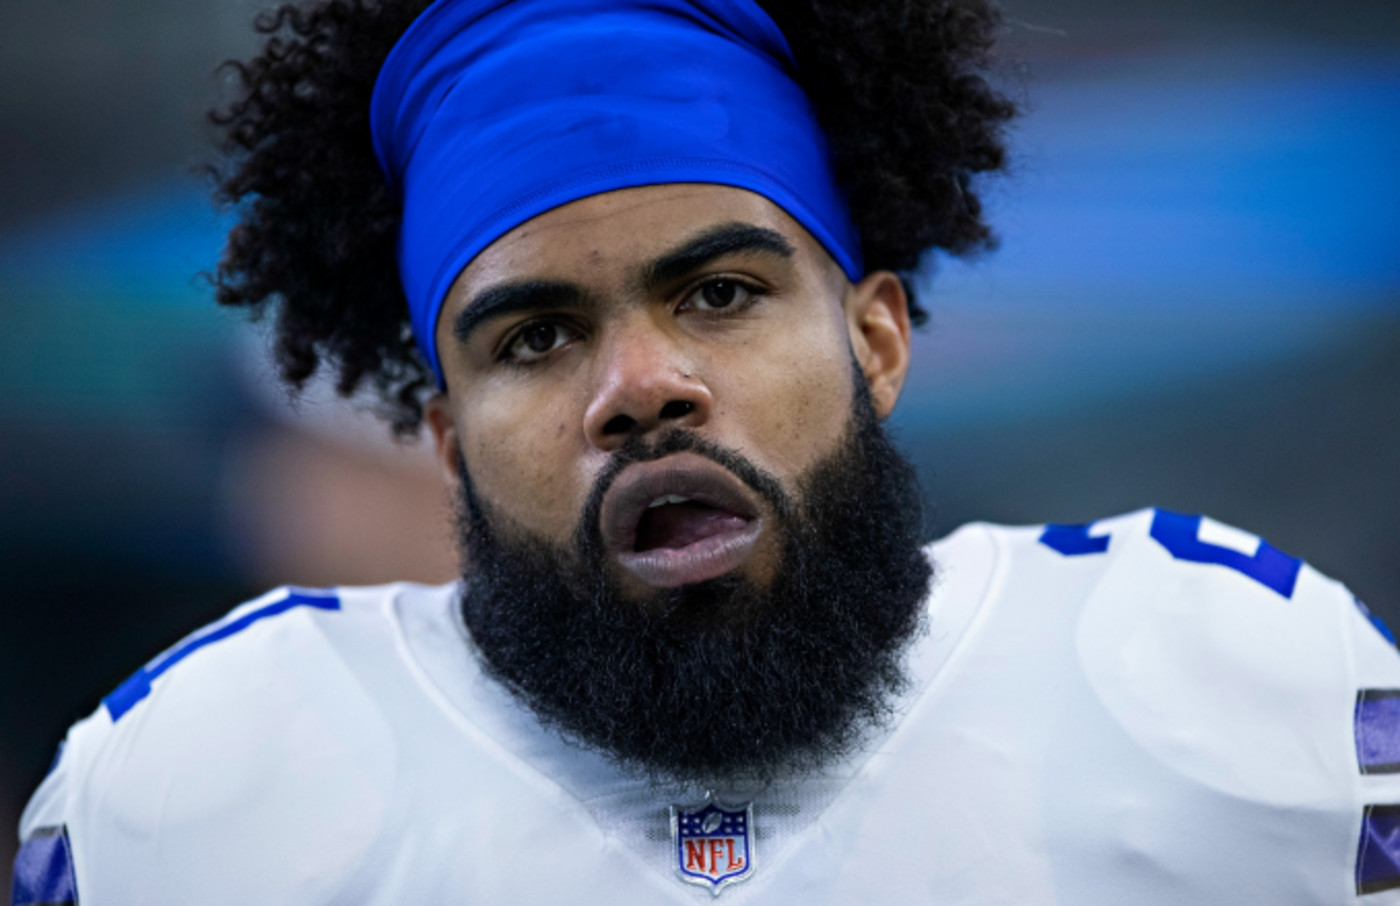 Video Shows Ezekiel Elliott Being Detained After Knocking Guard To Ground At Edc Las Vegas Complex